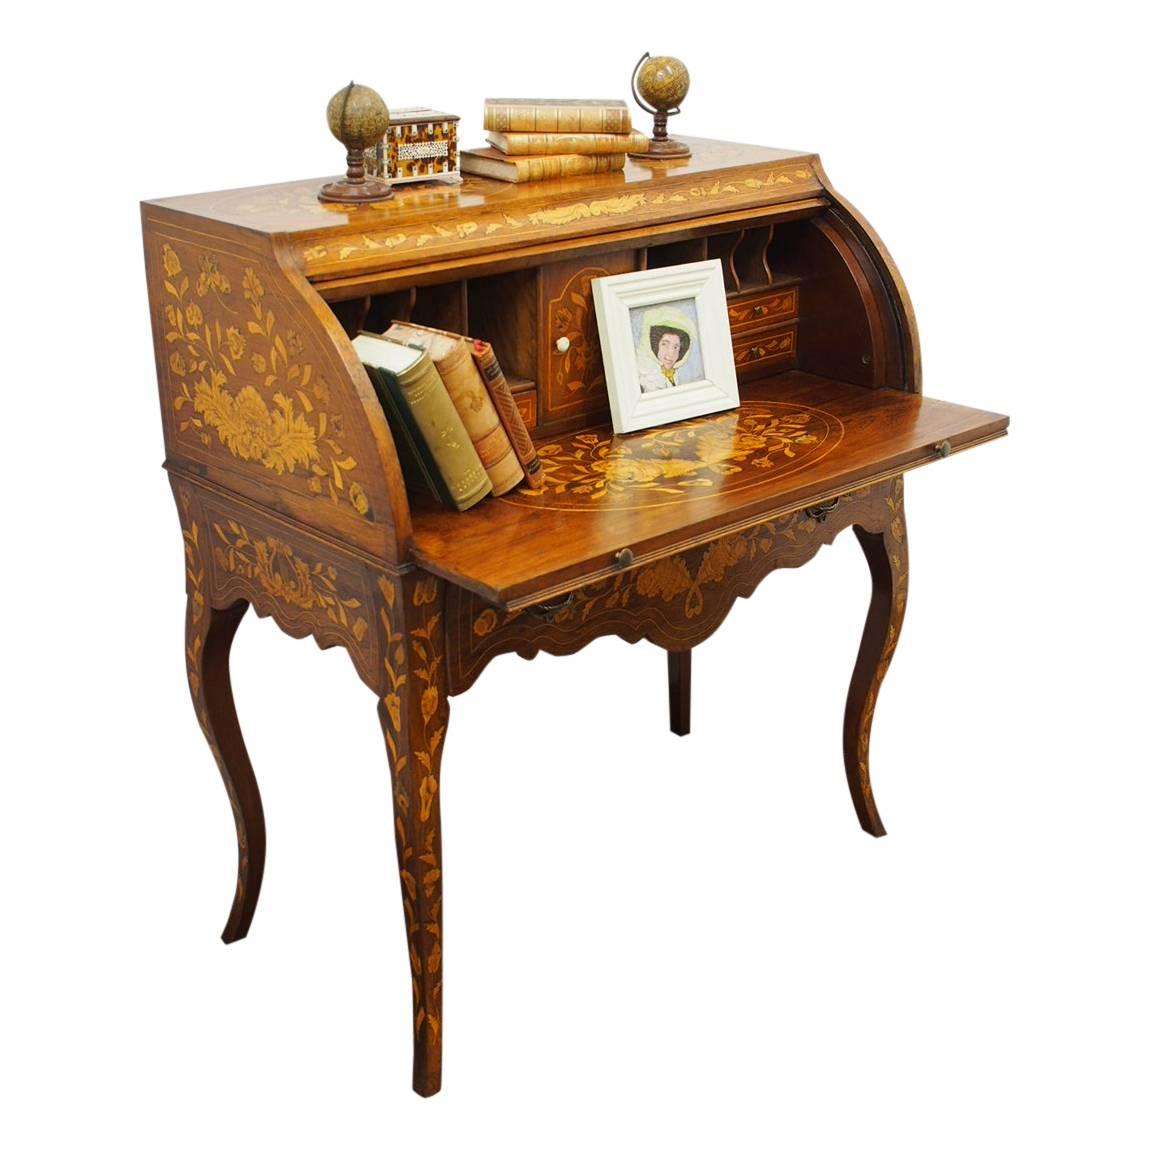 Unusual Dutch marquetry cylinder topped desk, circa 1830. The rectangular shaped desk is in a mellow, faded rosewood, and the sides, gables and legs are smothered in Dutch marquetry. The cylinder of the desk has a design of a big bouquet of flowers